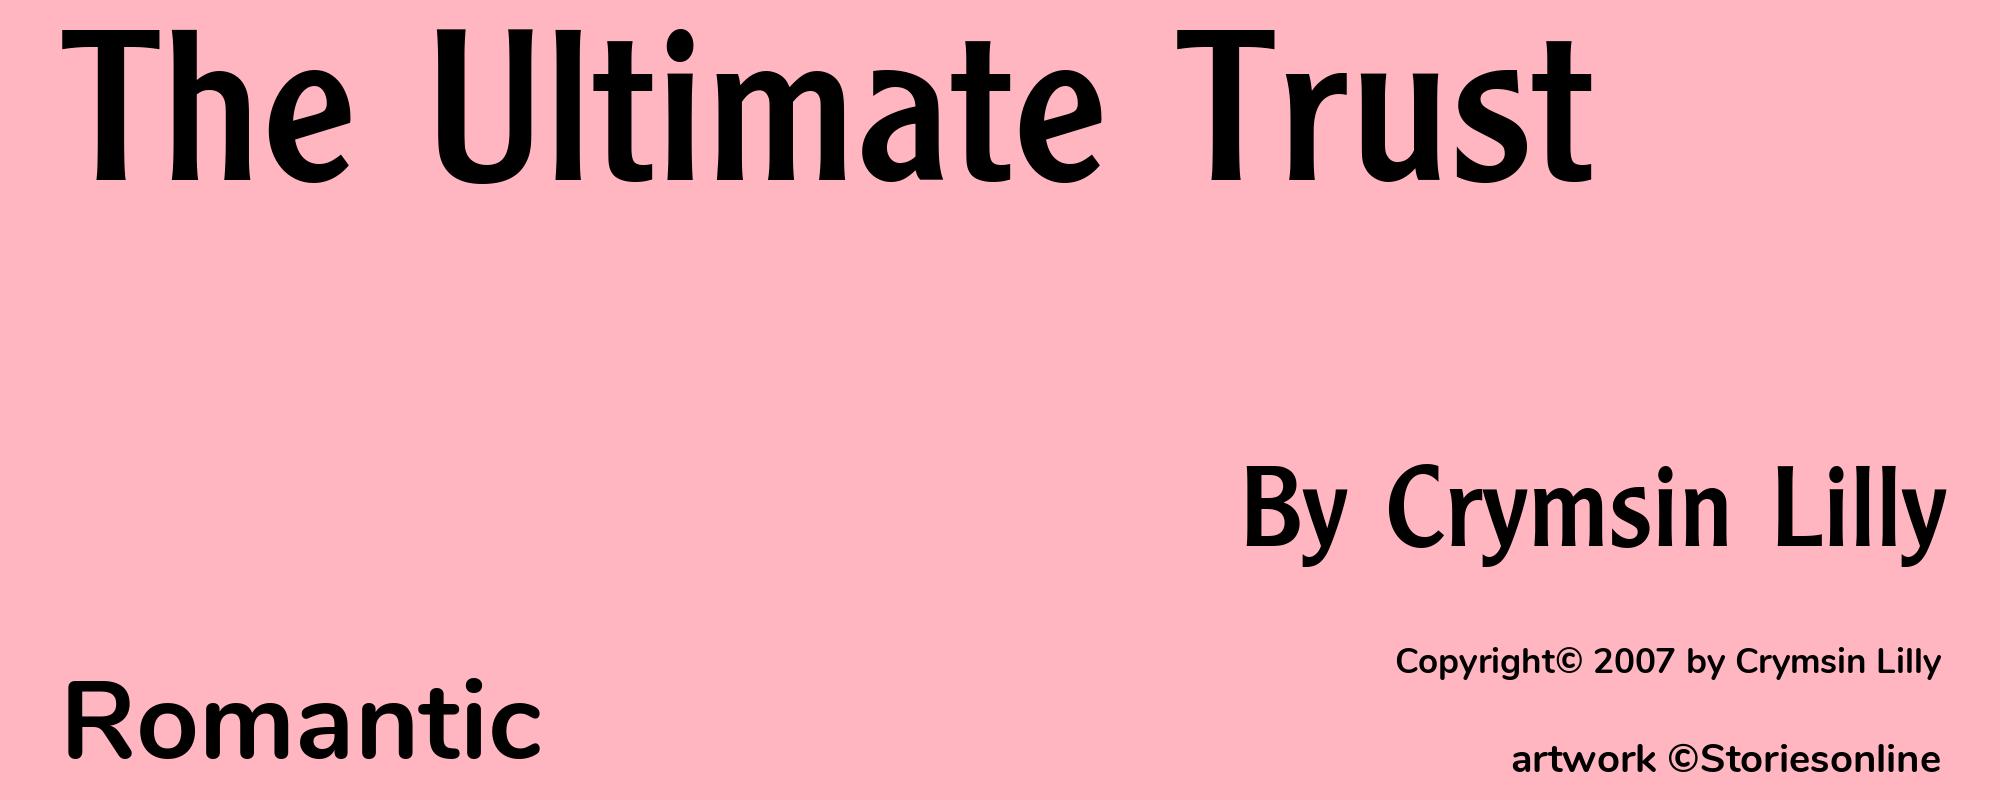 The Ultimate Trust - Cover